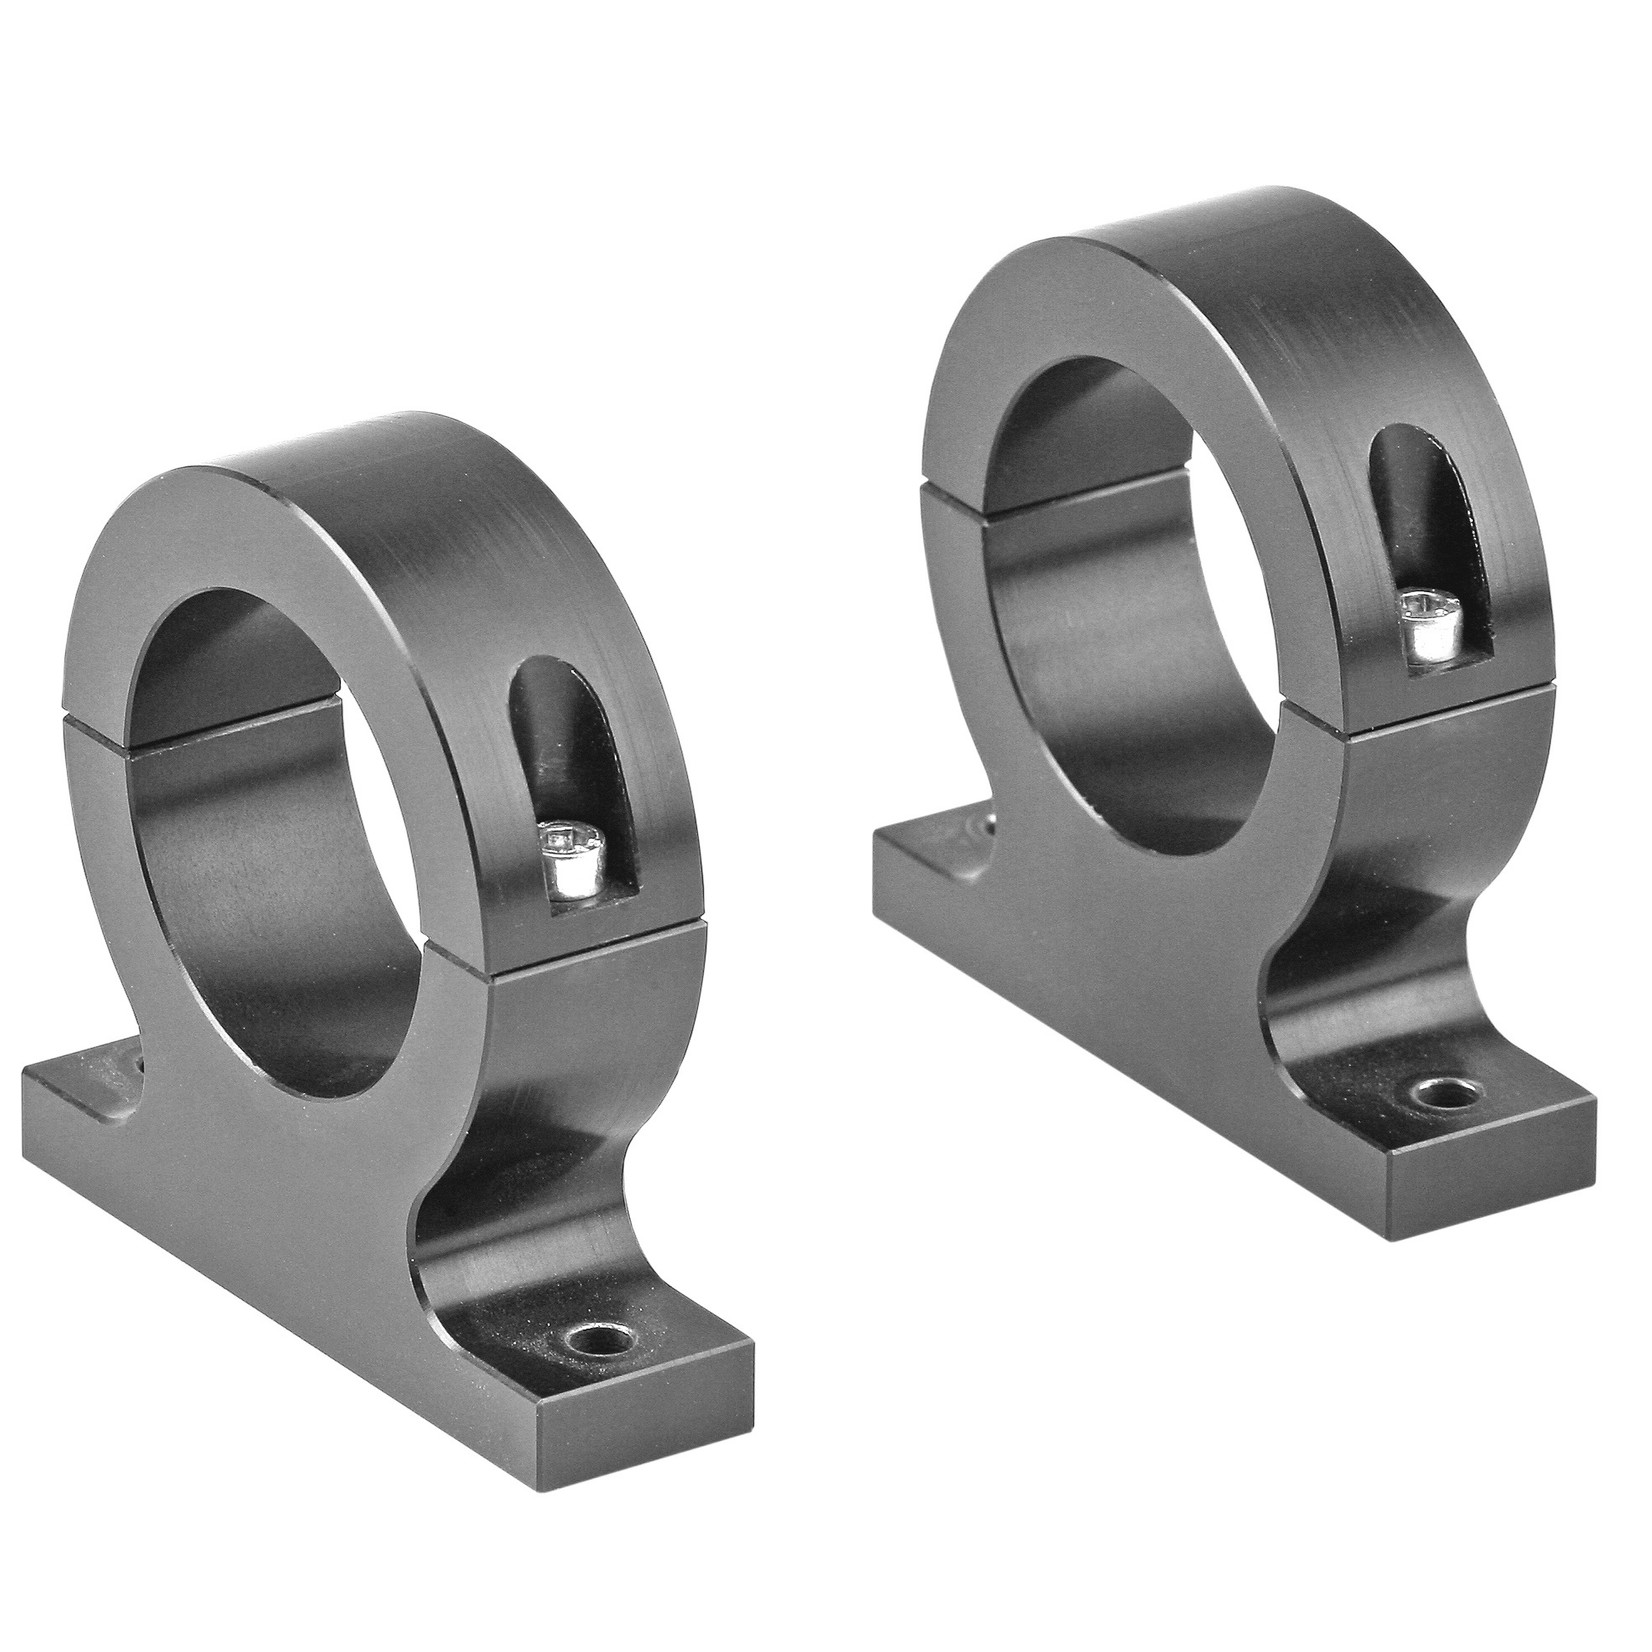 SHR-P Clamps for optics on guides CV-P-300-P and CV-P-400-P